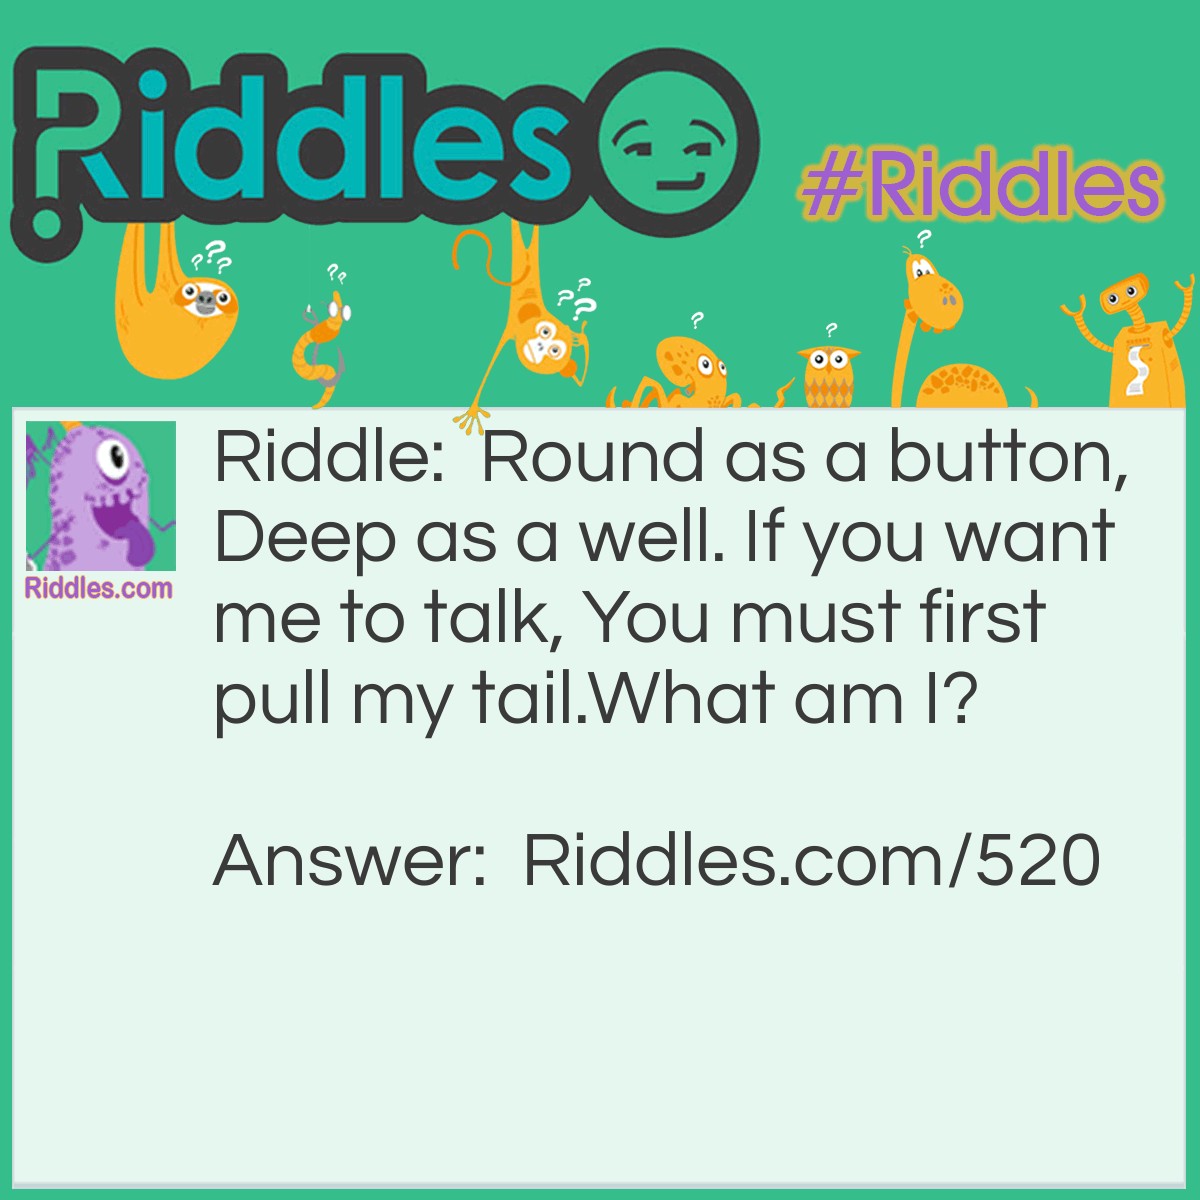 Riddle: Round as a button, Deep as a well. If you want me to talk, You must first pull my tail.
What am I? Answer: A bell.